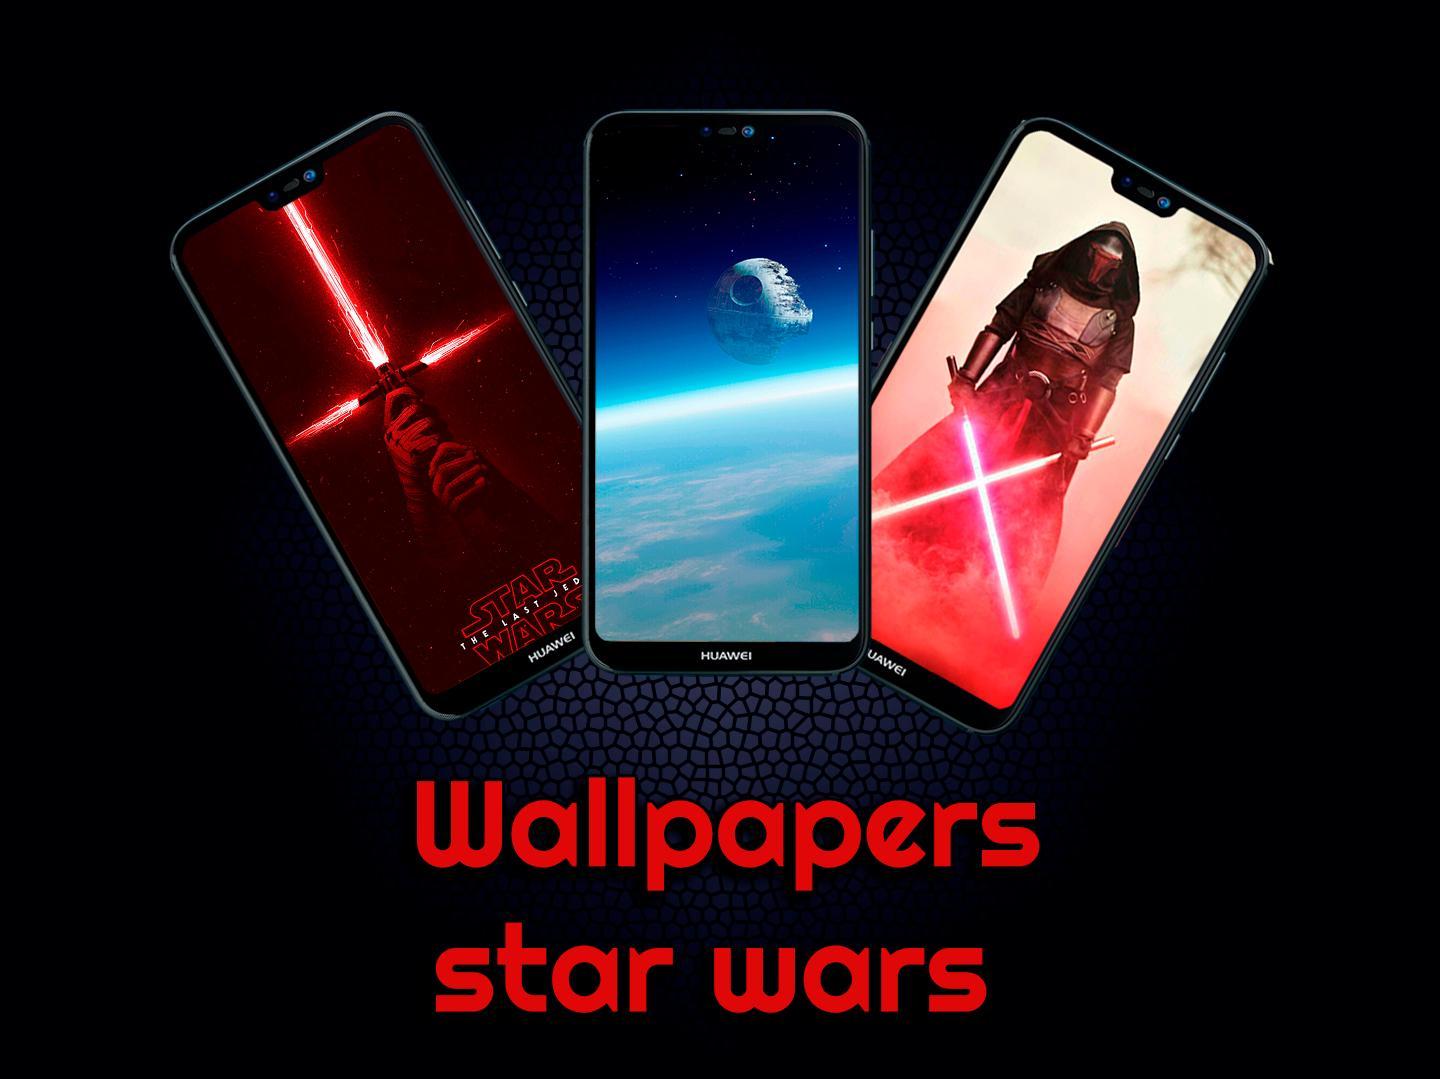 Star Wars Wallpapers Hd For Android Apk Download